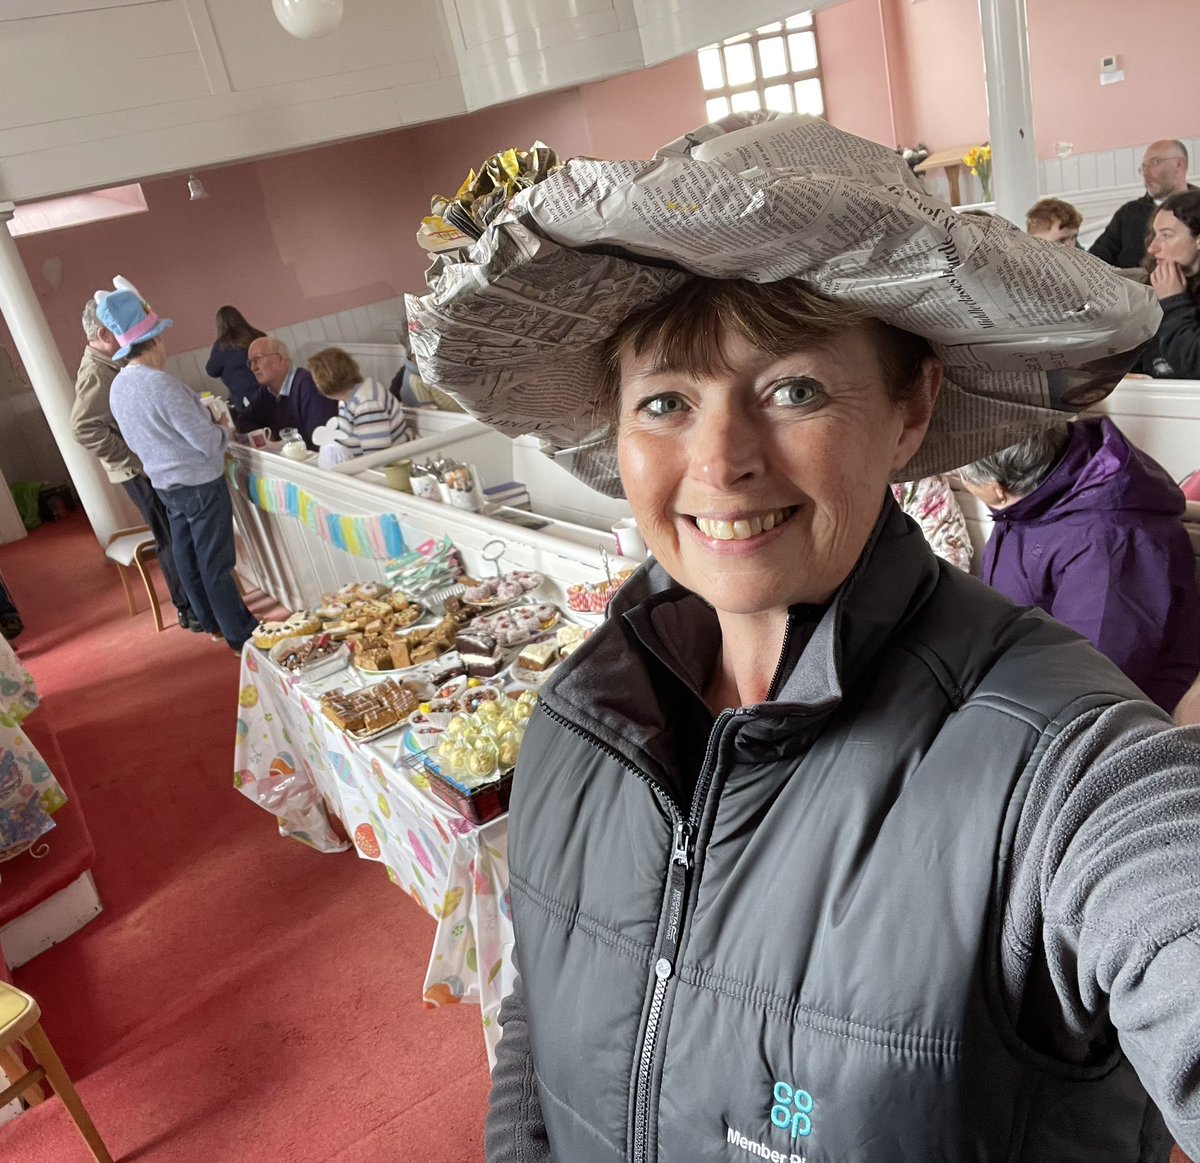 #MixingWithMembers at the Daffodil T in the Church, fundraising for #FriendsofPortnahavenChurch today, in my #EasterBonnet @coopuk @Tom_MPM @IslayCo